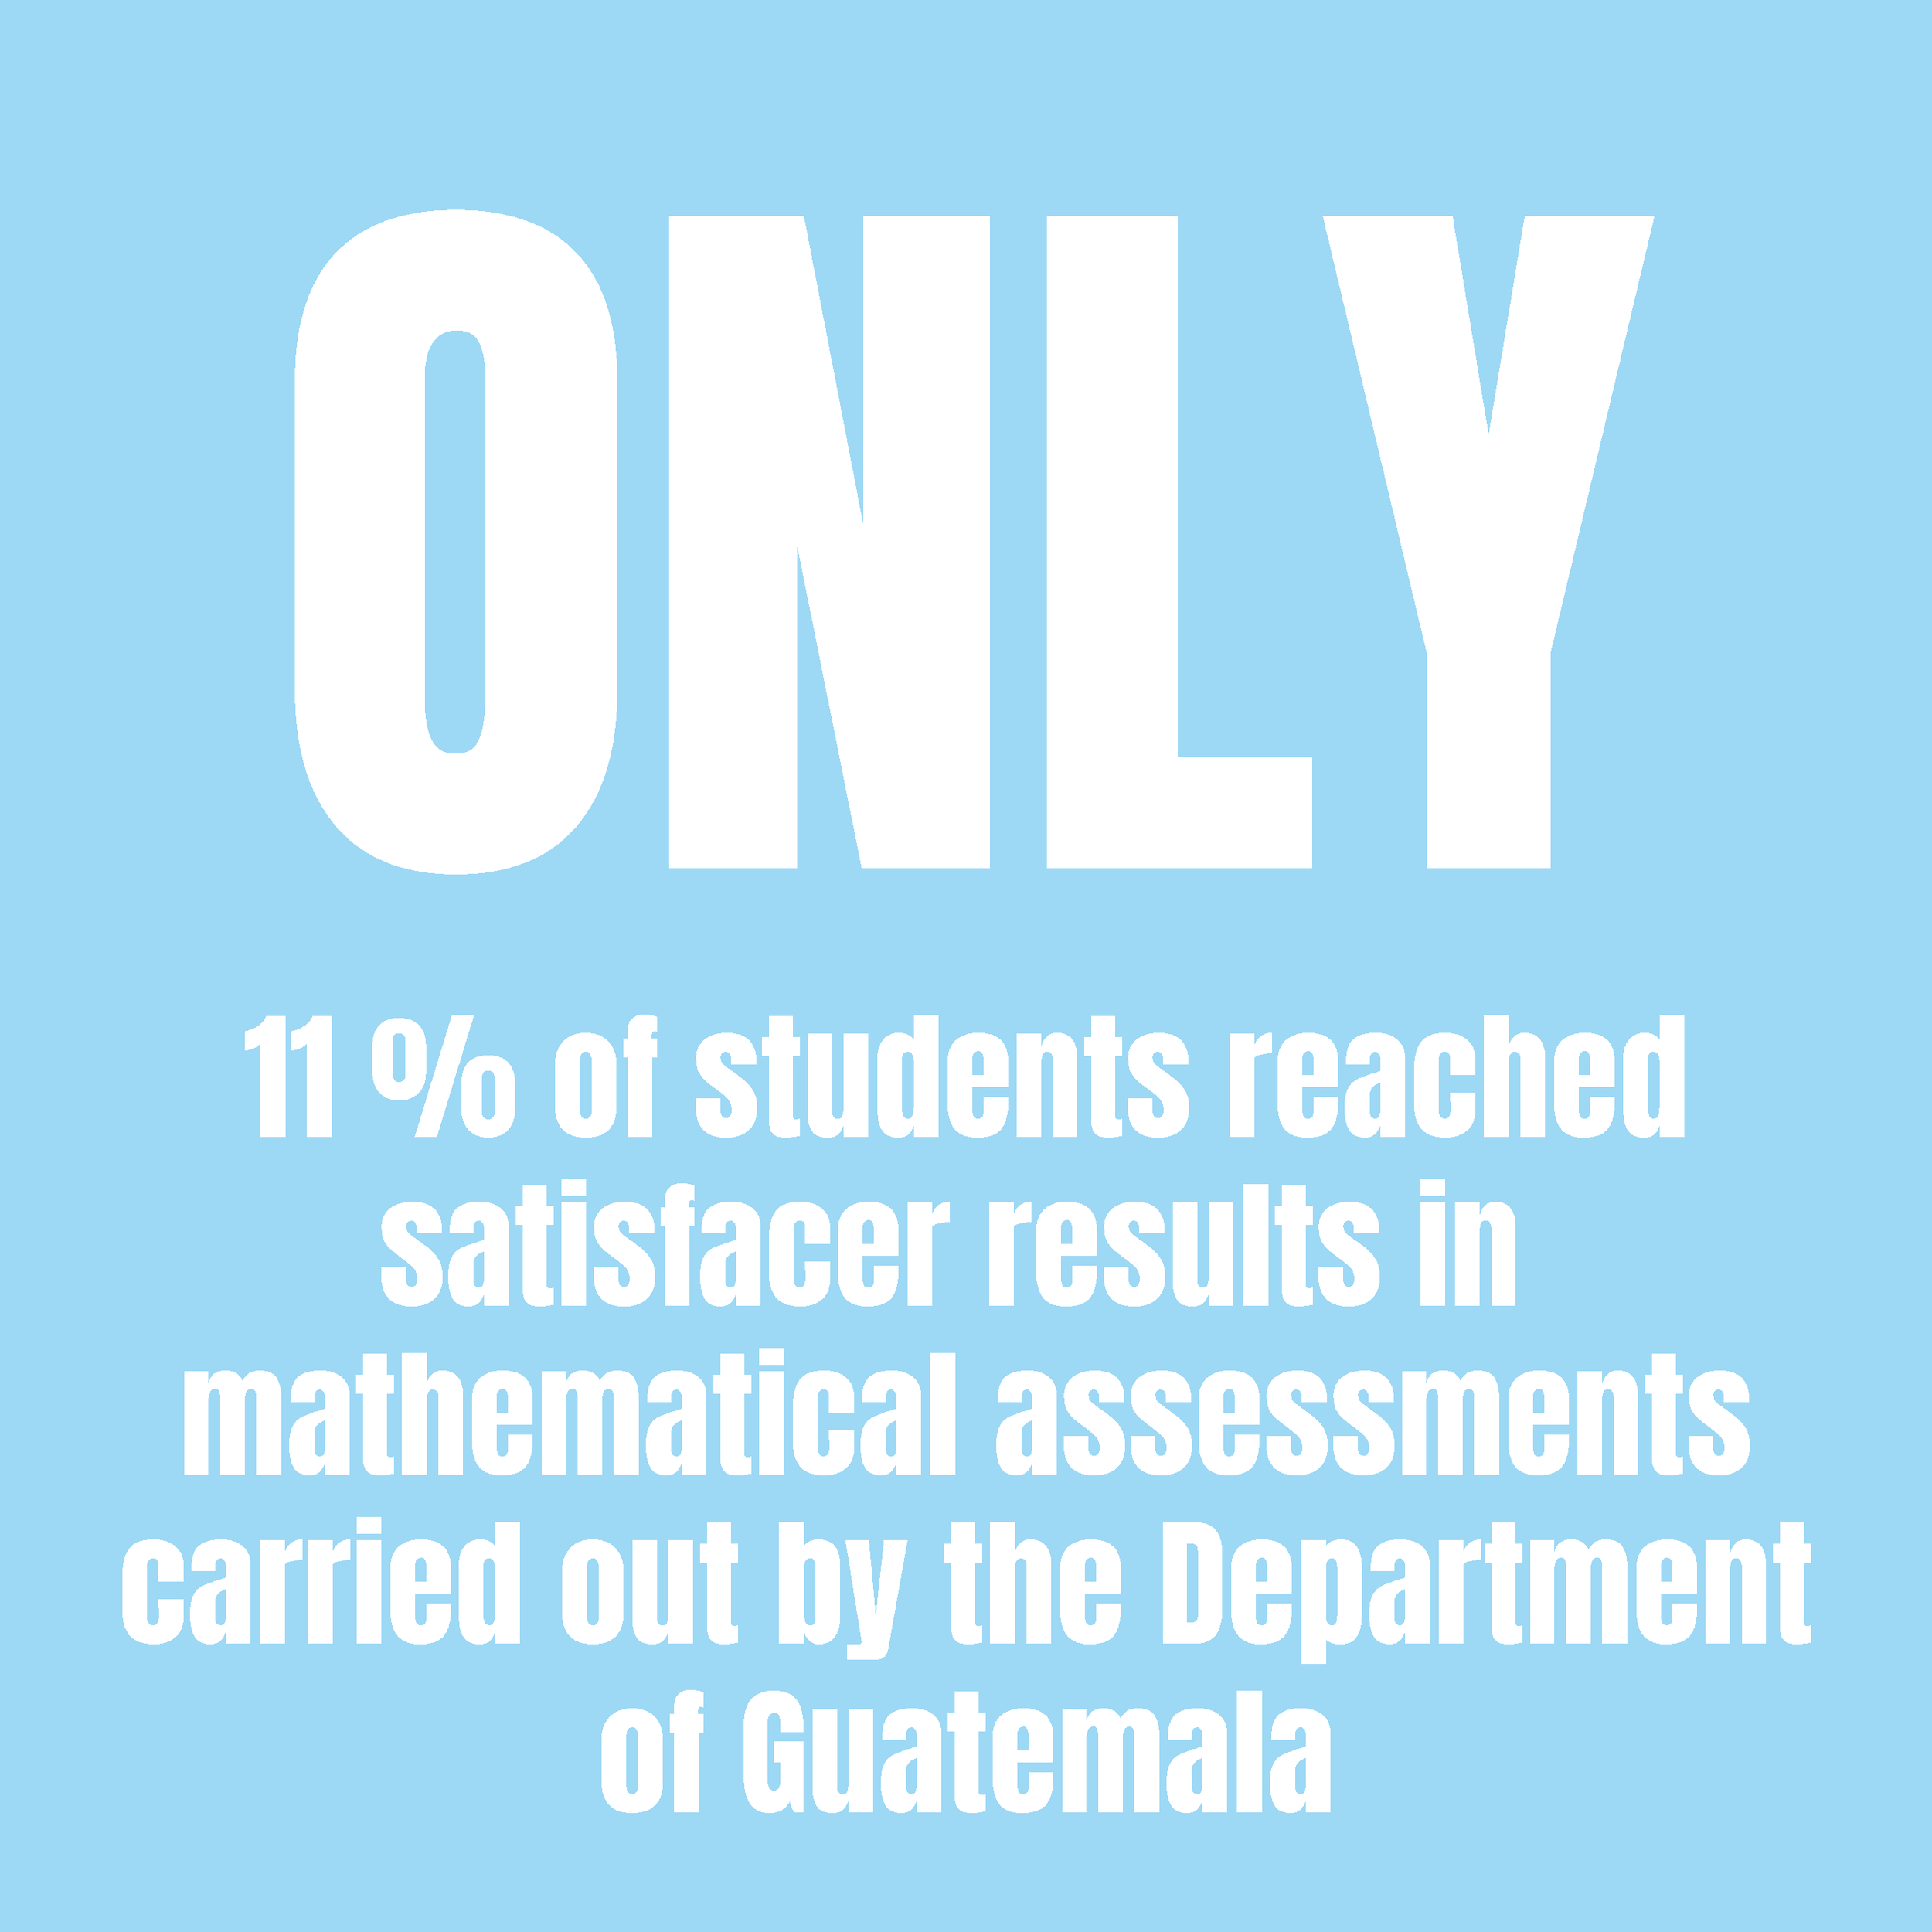  In the national reading assessments, only 35% of students reached satisfactory results, and in math, only 11%. 